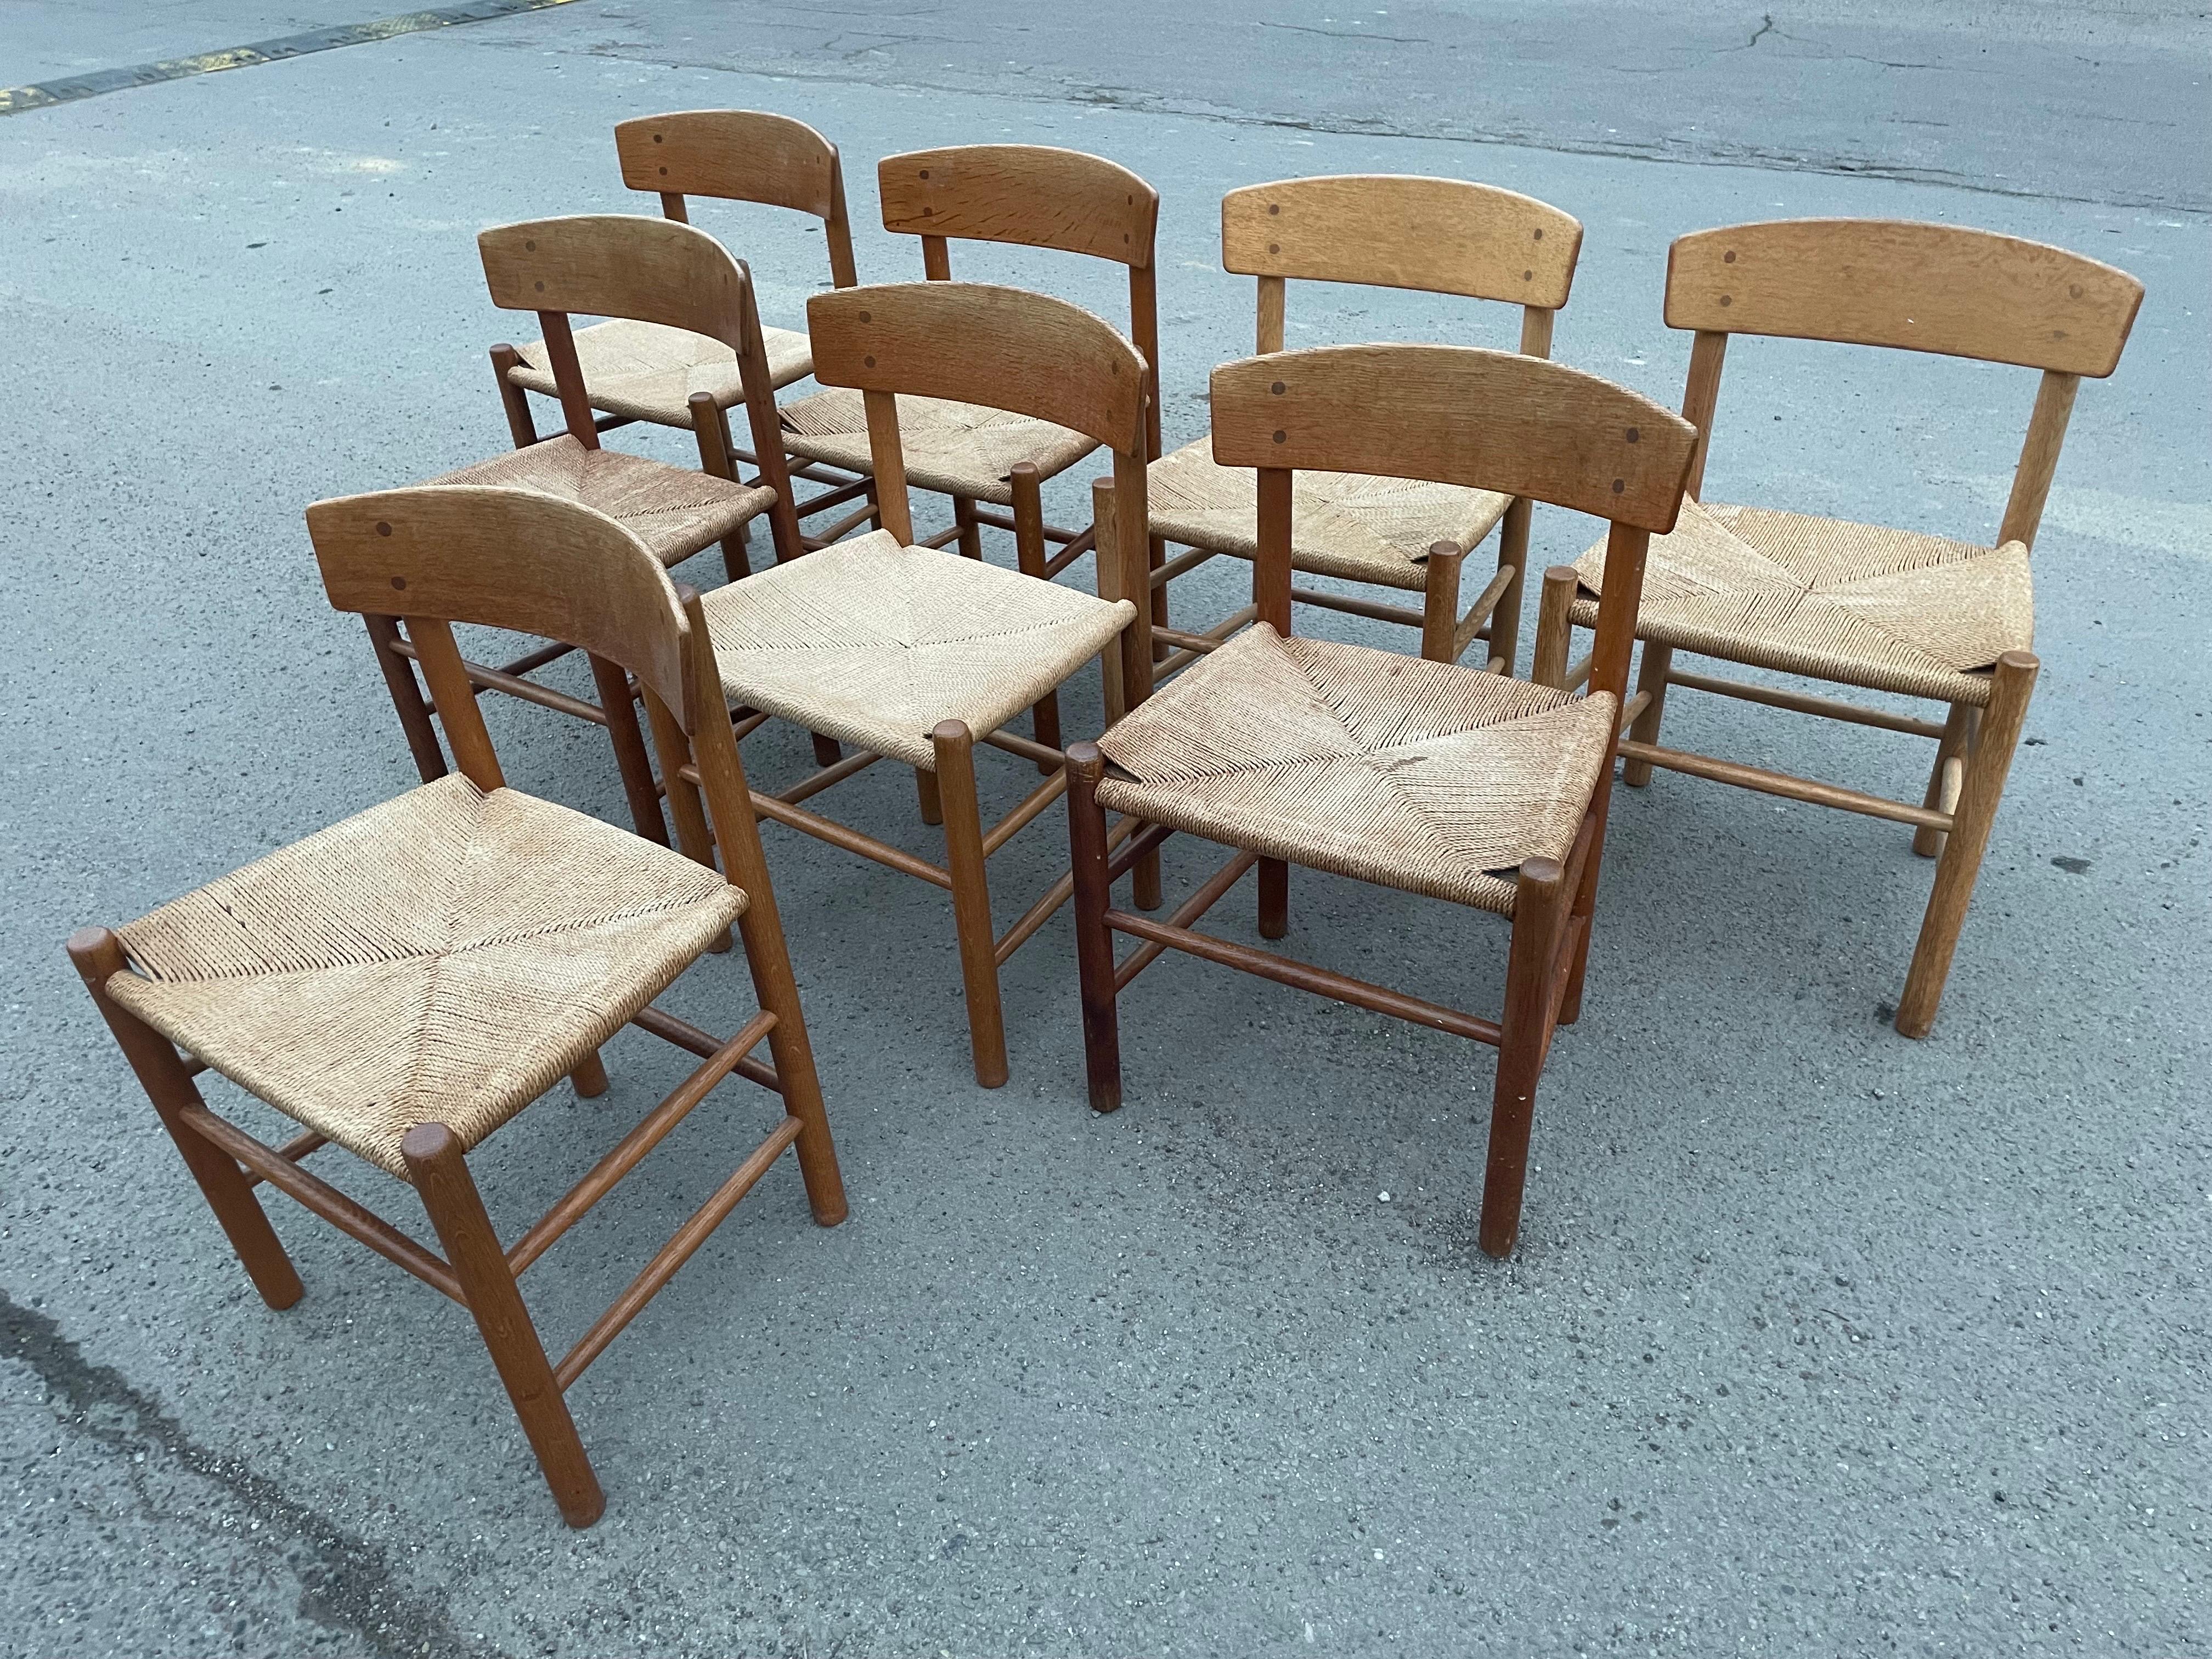 A beautiful set of 8 vintage patinated oak chairs by Børge Mogensen. This particular chair is called 